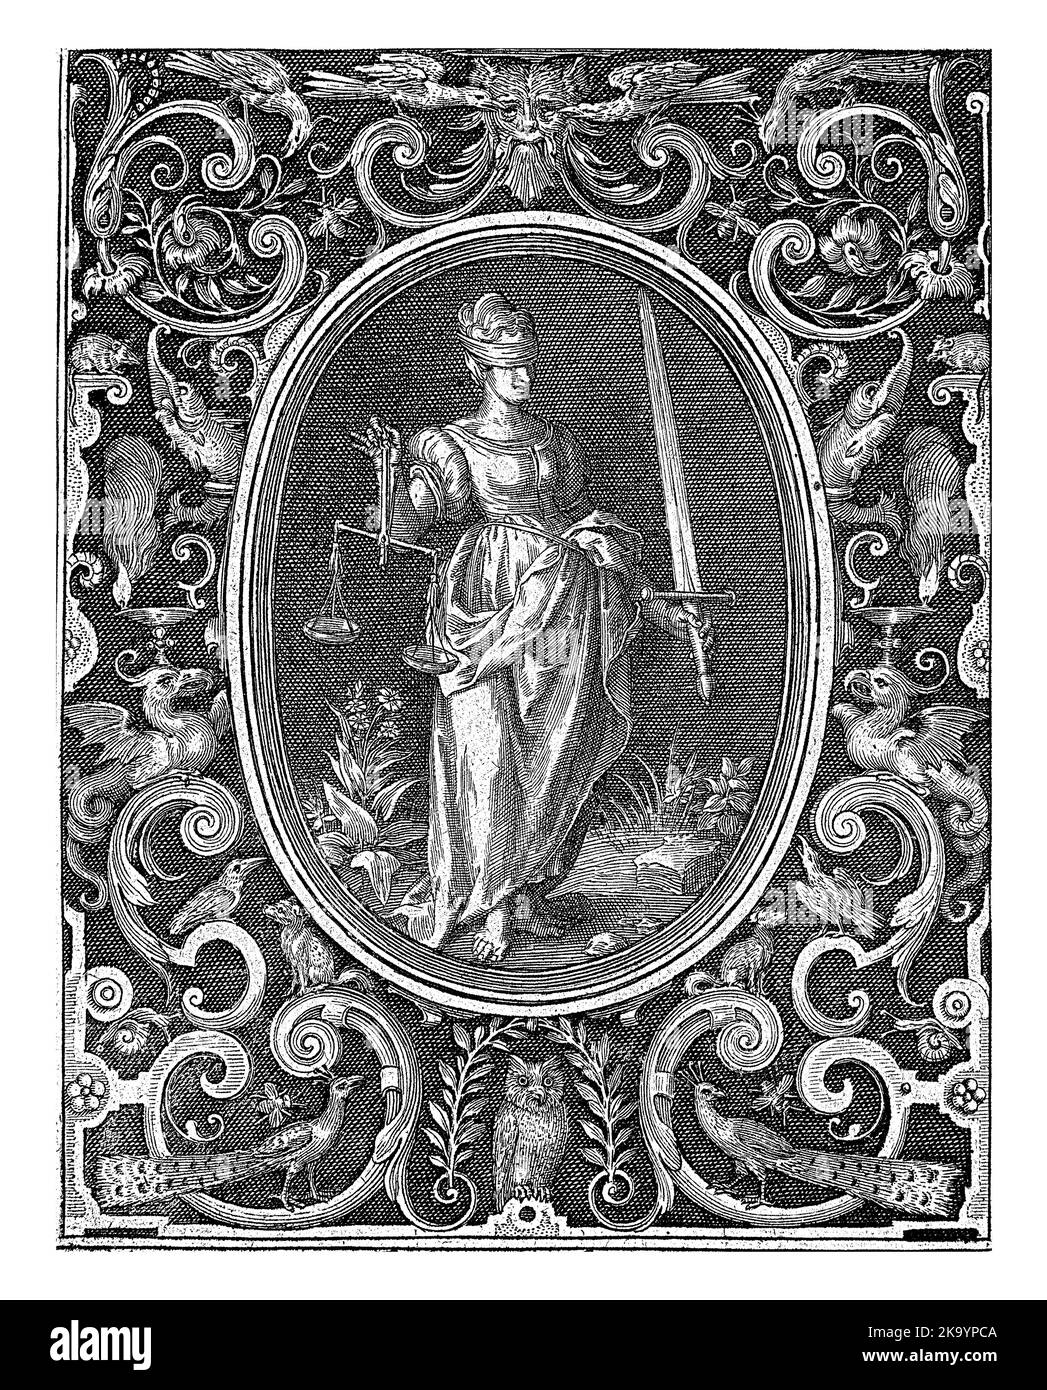 Sheet 4 of a series of 4 numbered sheets with surface decorations. Justitia, personification of Justice, standing in oval. At the bottom of the frame Stock Photo